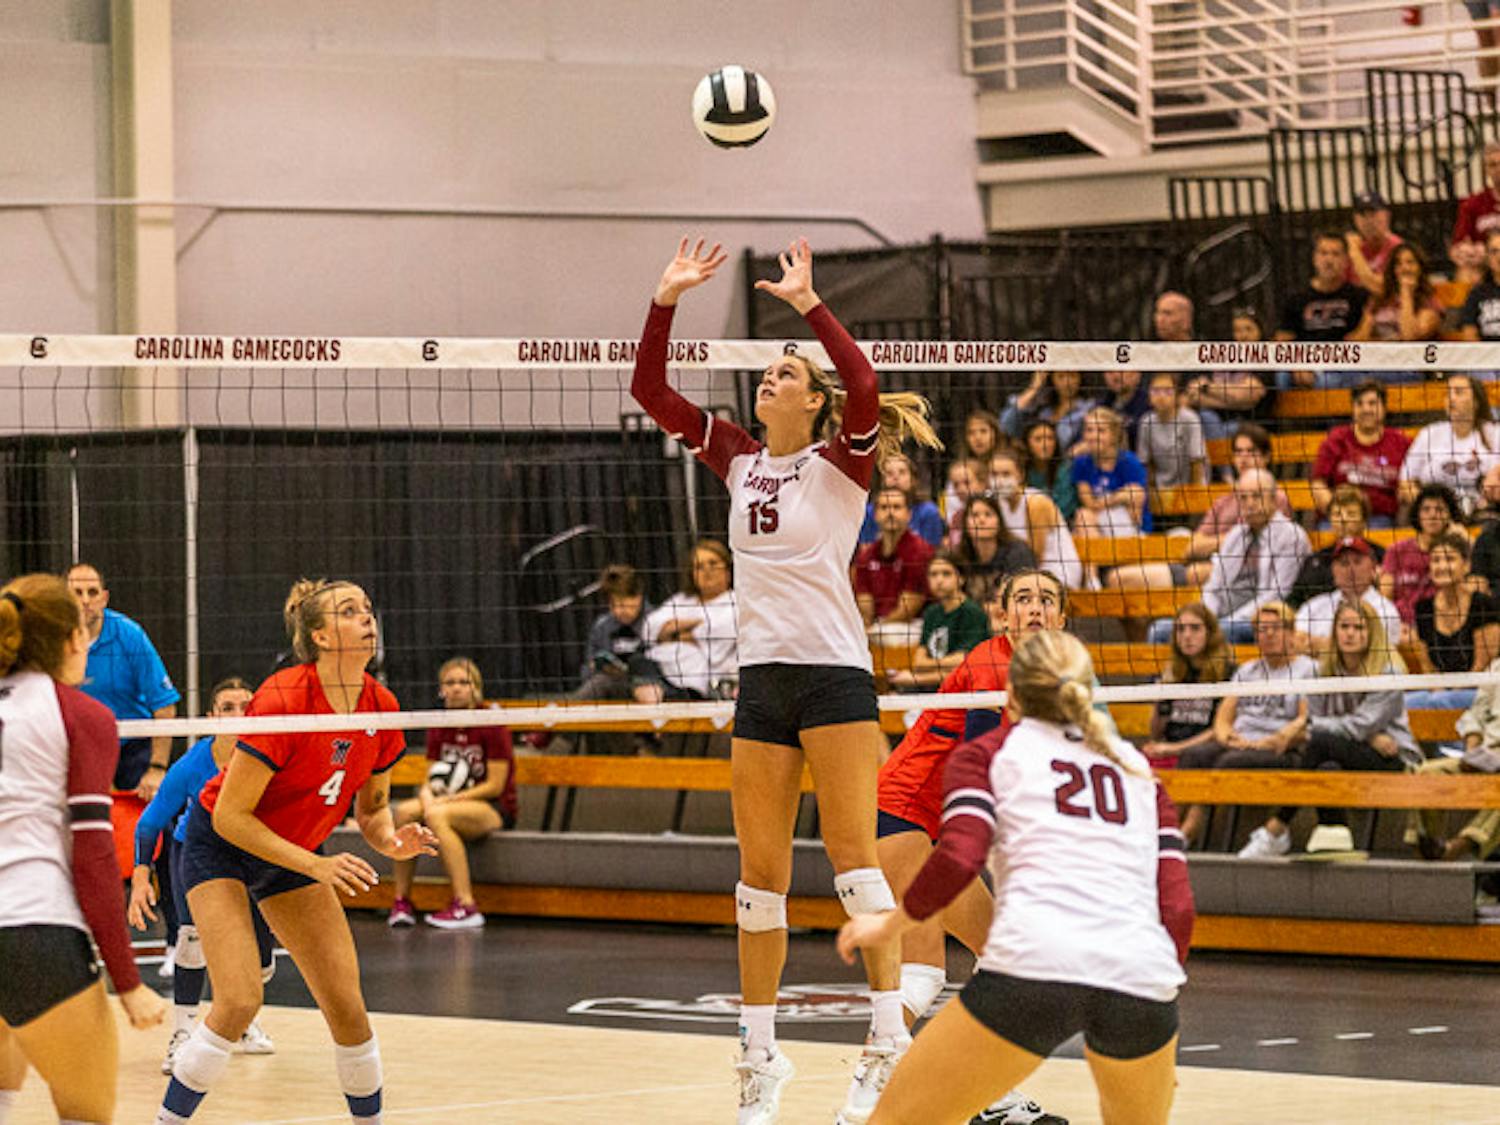 Sophomore setter Claire Wilson sets the ball during the match between South Carolina and Ole Miss on Nov. 5, 2022. The Rebels beat the Gamecocks 3-1.&nbsp;